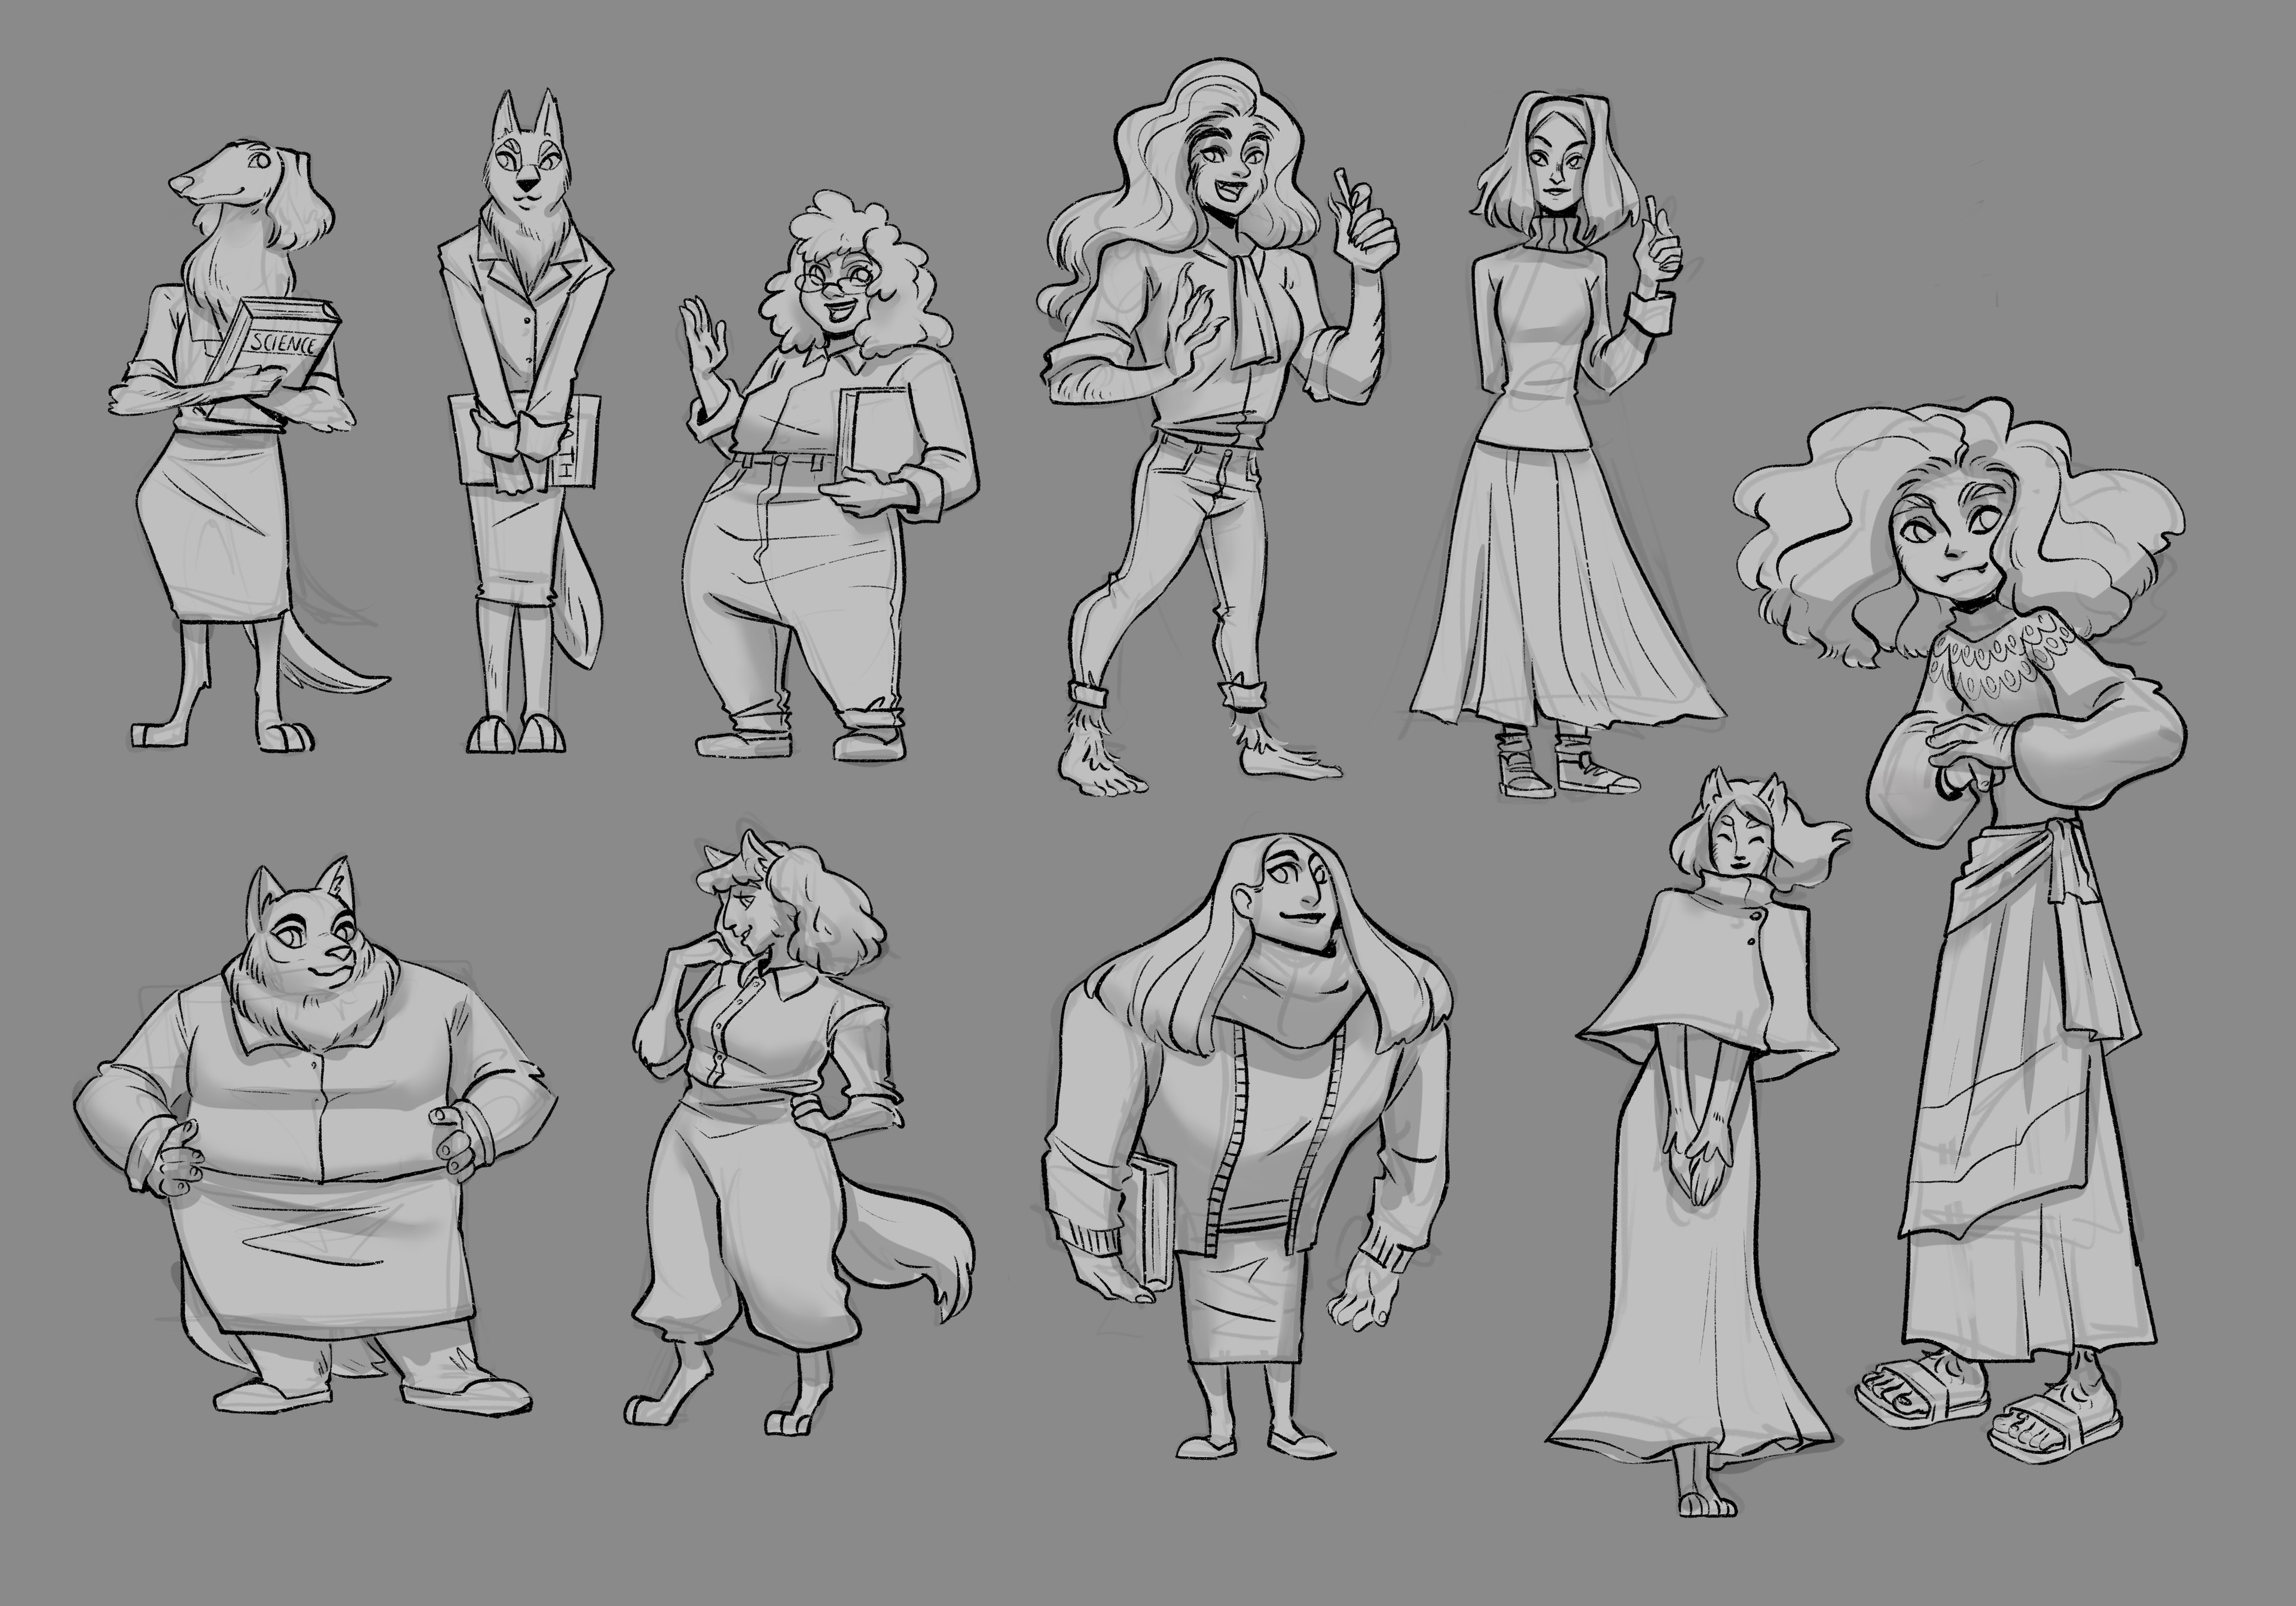 Character thumbnails, exploring different shapes and approaches.